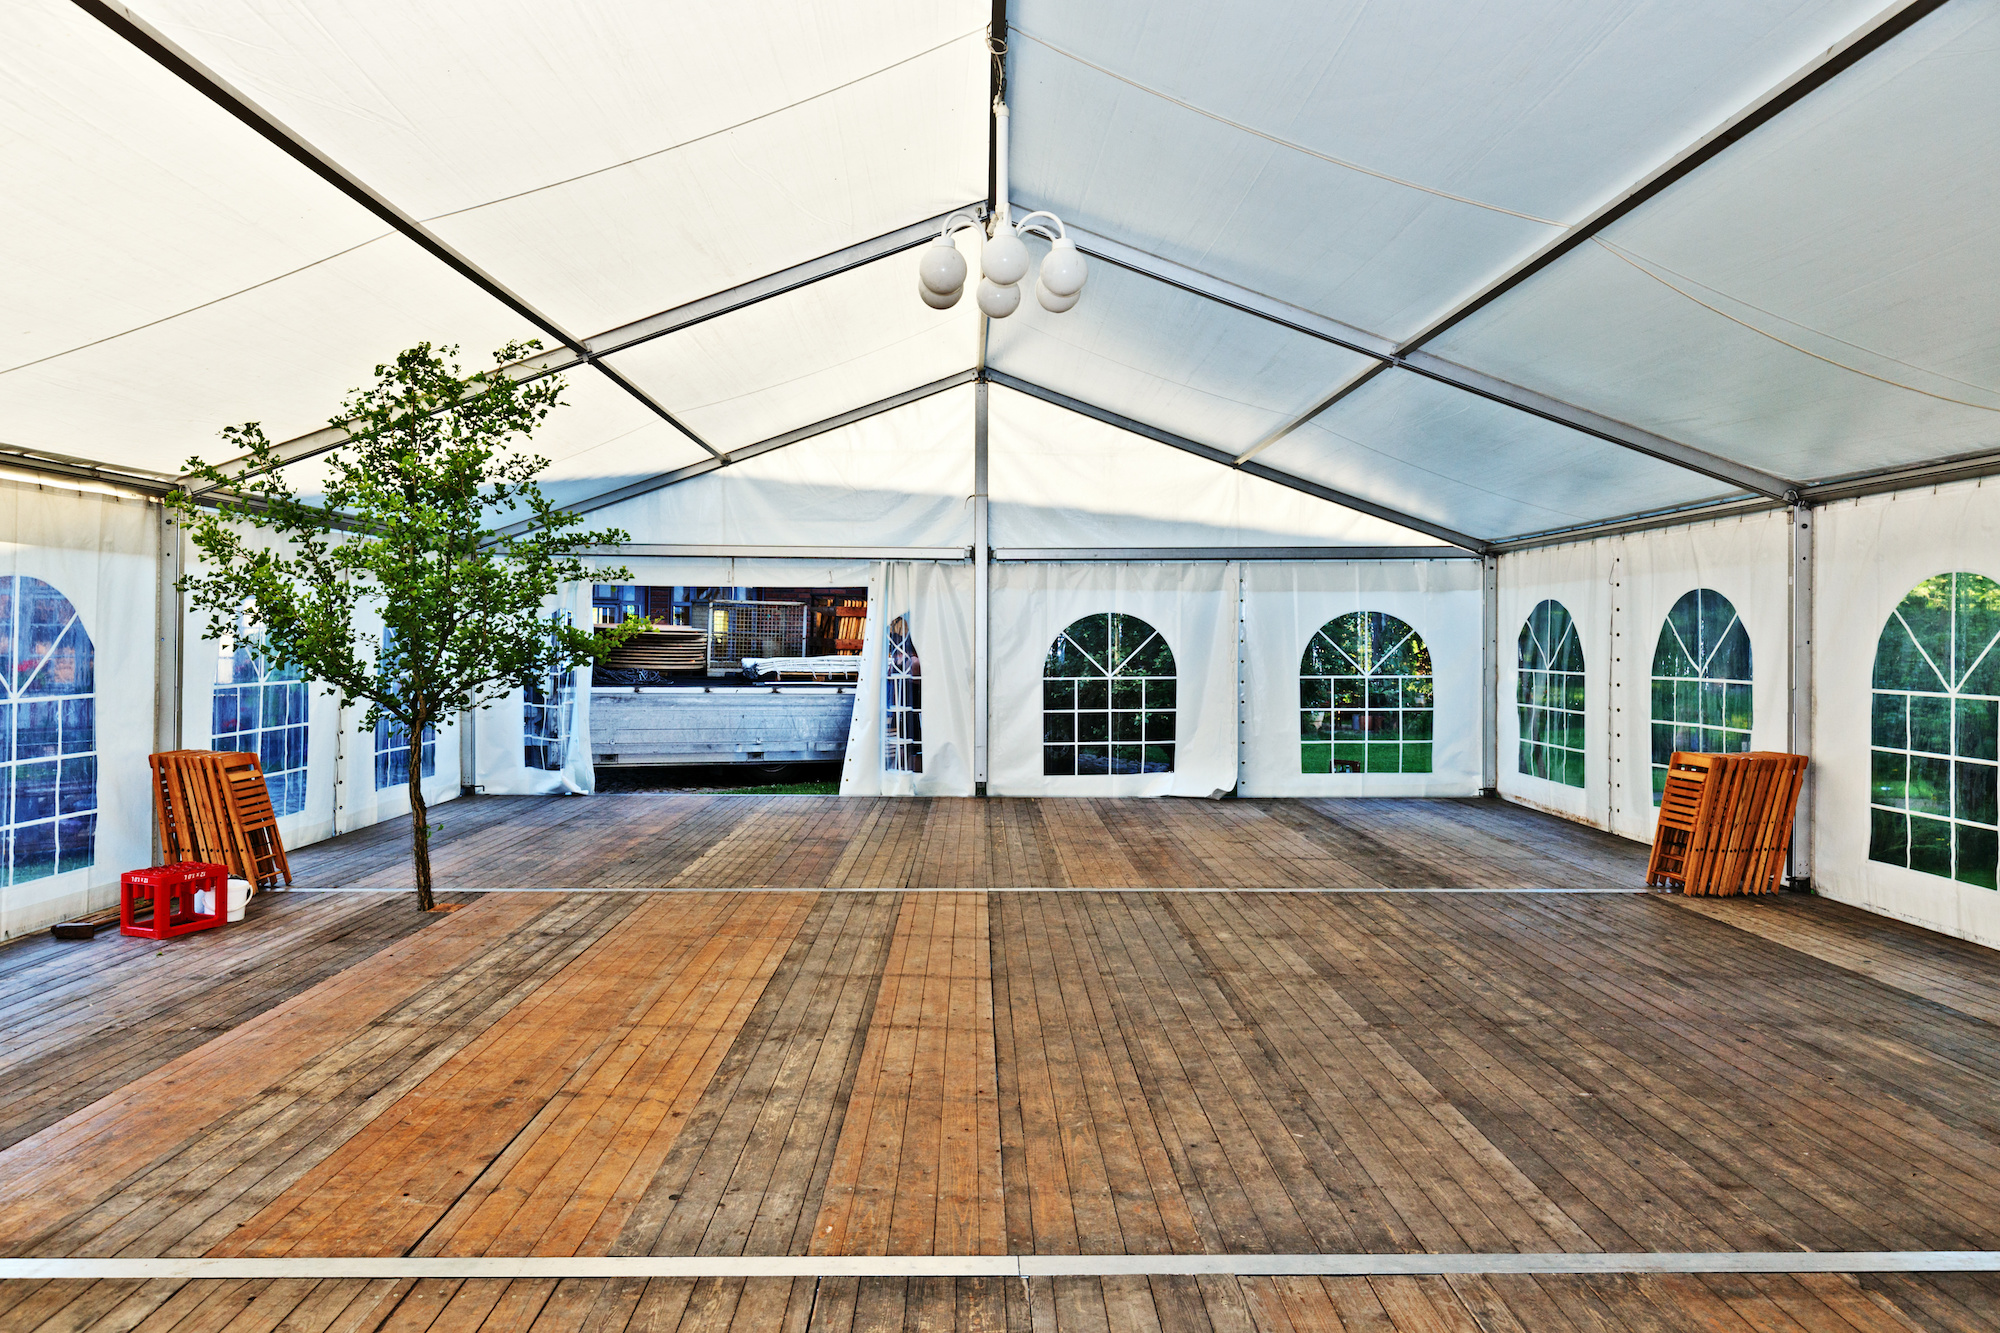 Air Conditioned Tent party rental equipment